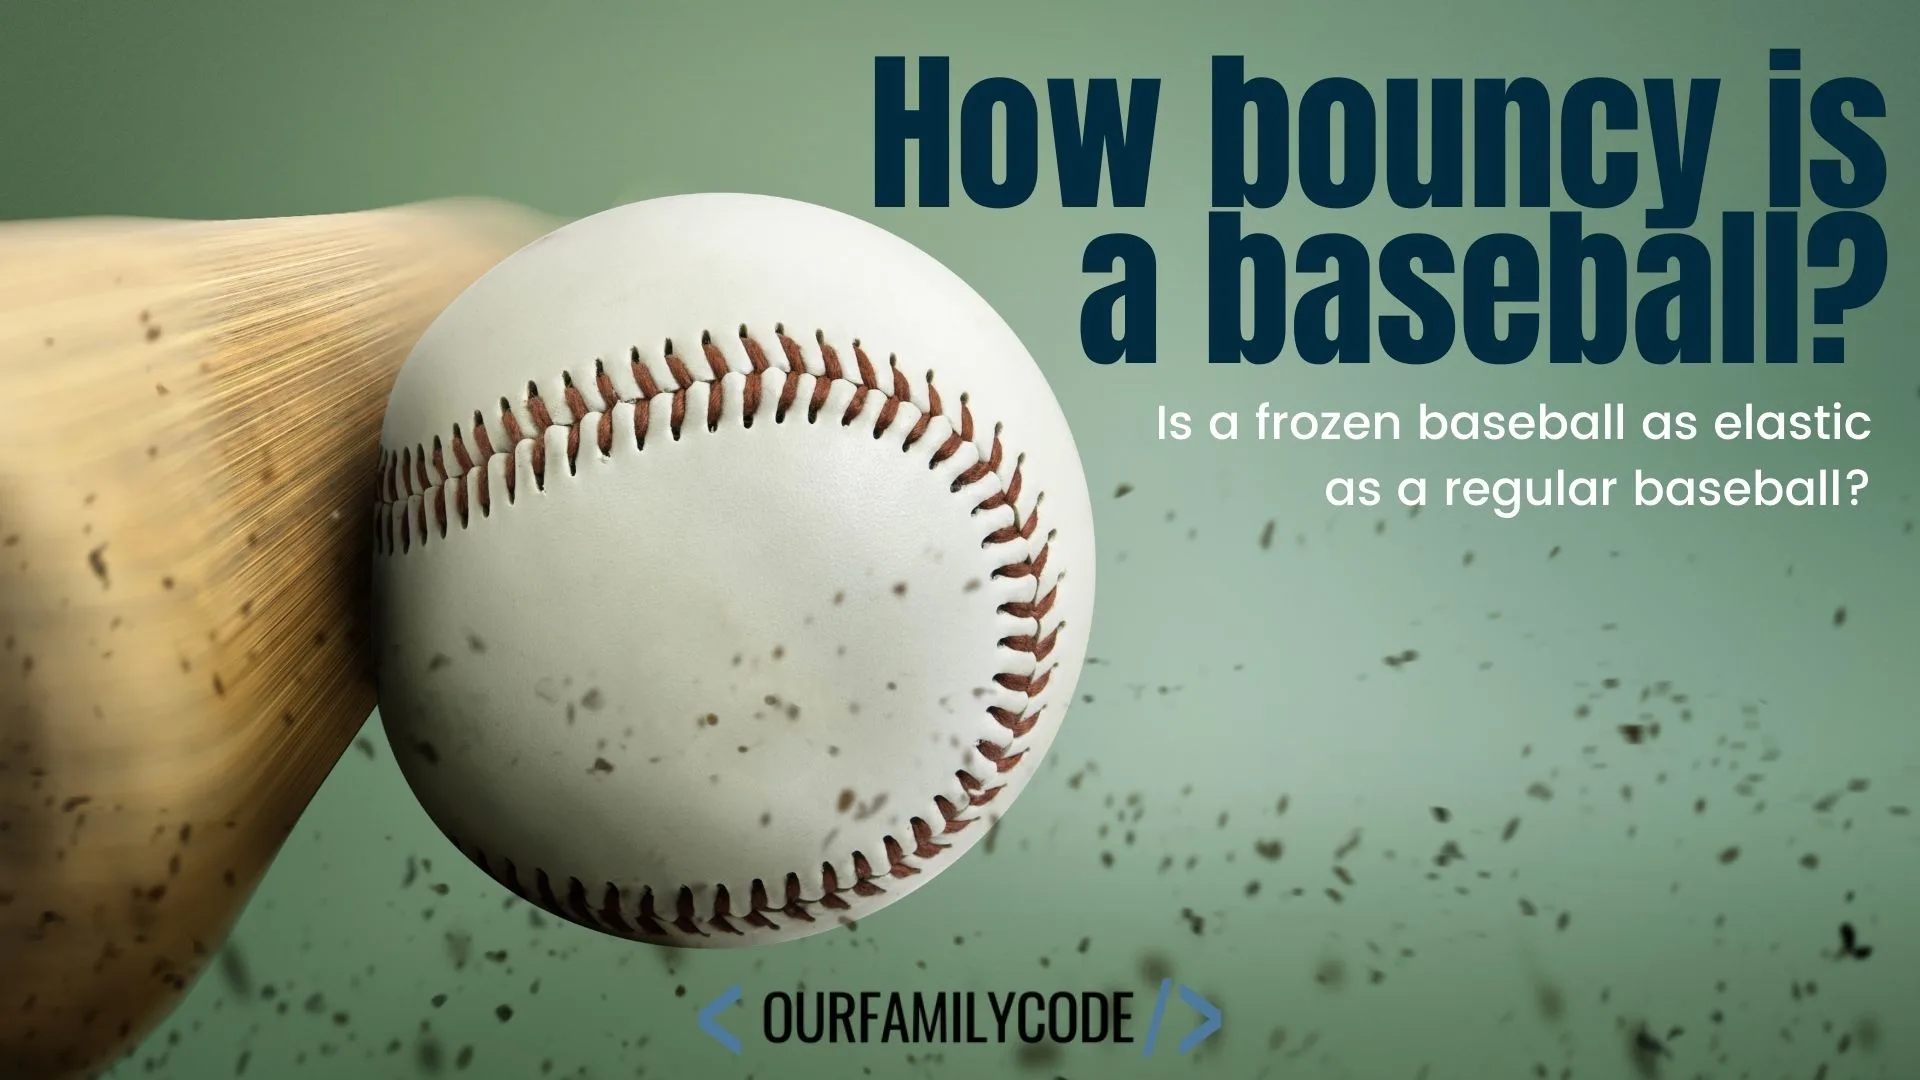 A picture of a bat hitting a baseball with text that says "how bouncy is a baseball? Is a frozen baseball as elastic as a regular baseball?"